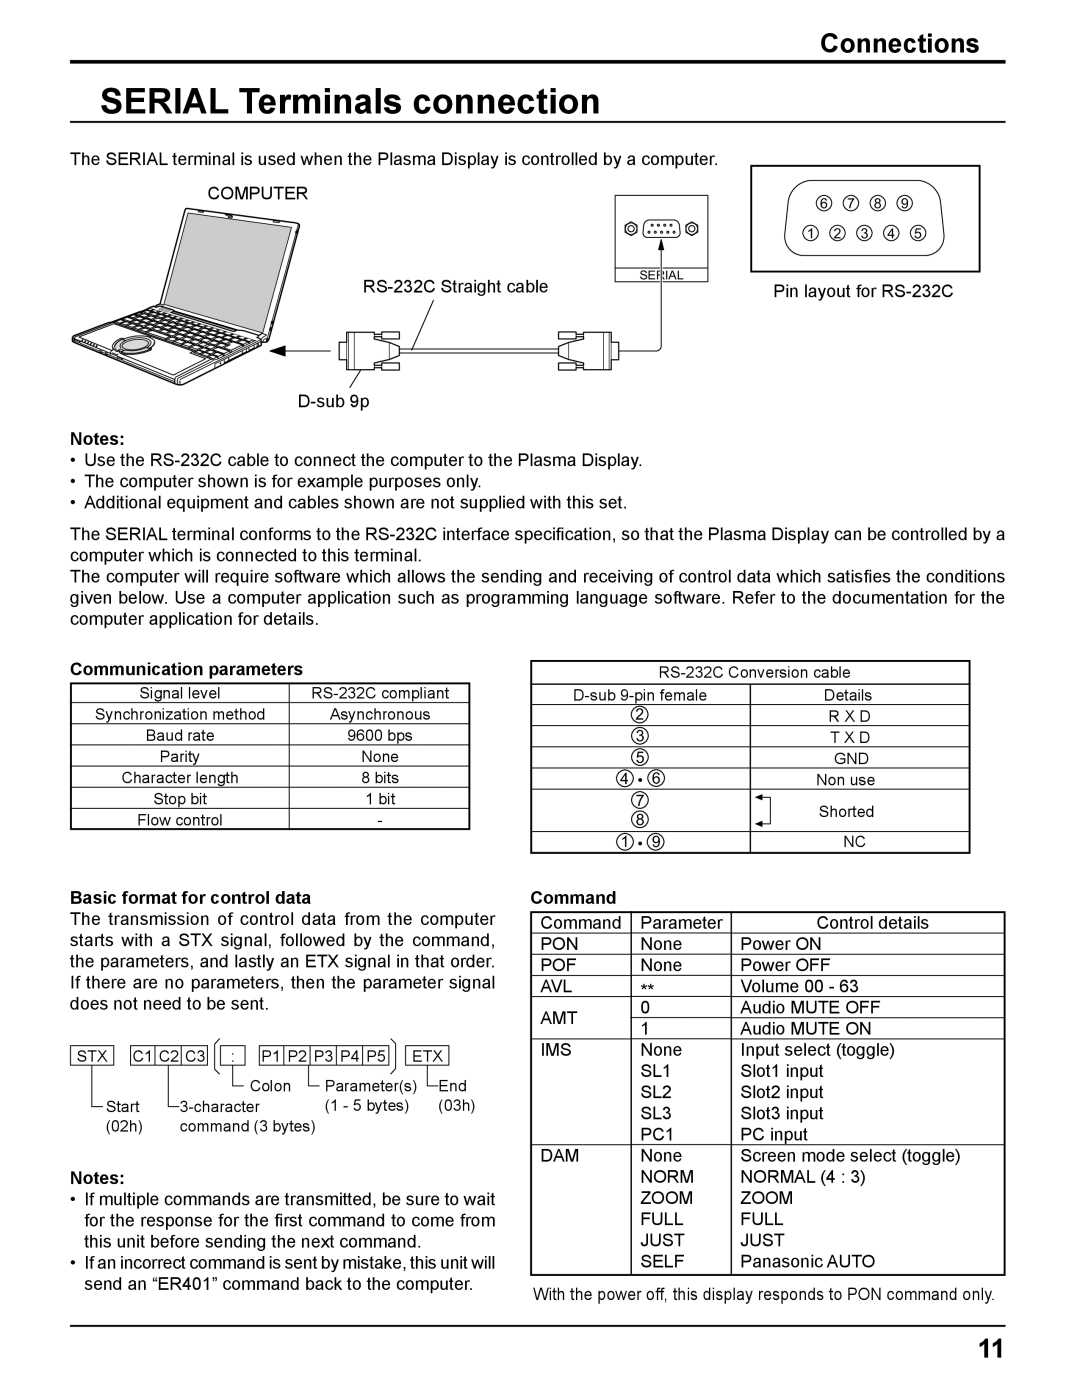 Panasonic TQBC2033 manual SERIAL Terminals connection, Connections, Communication parameters, Basic format for control data 